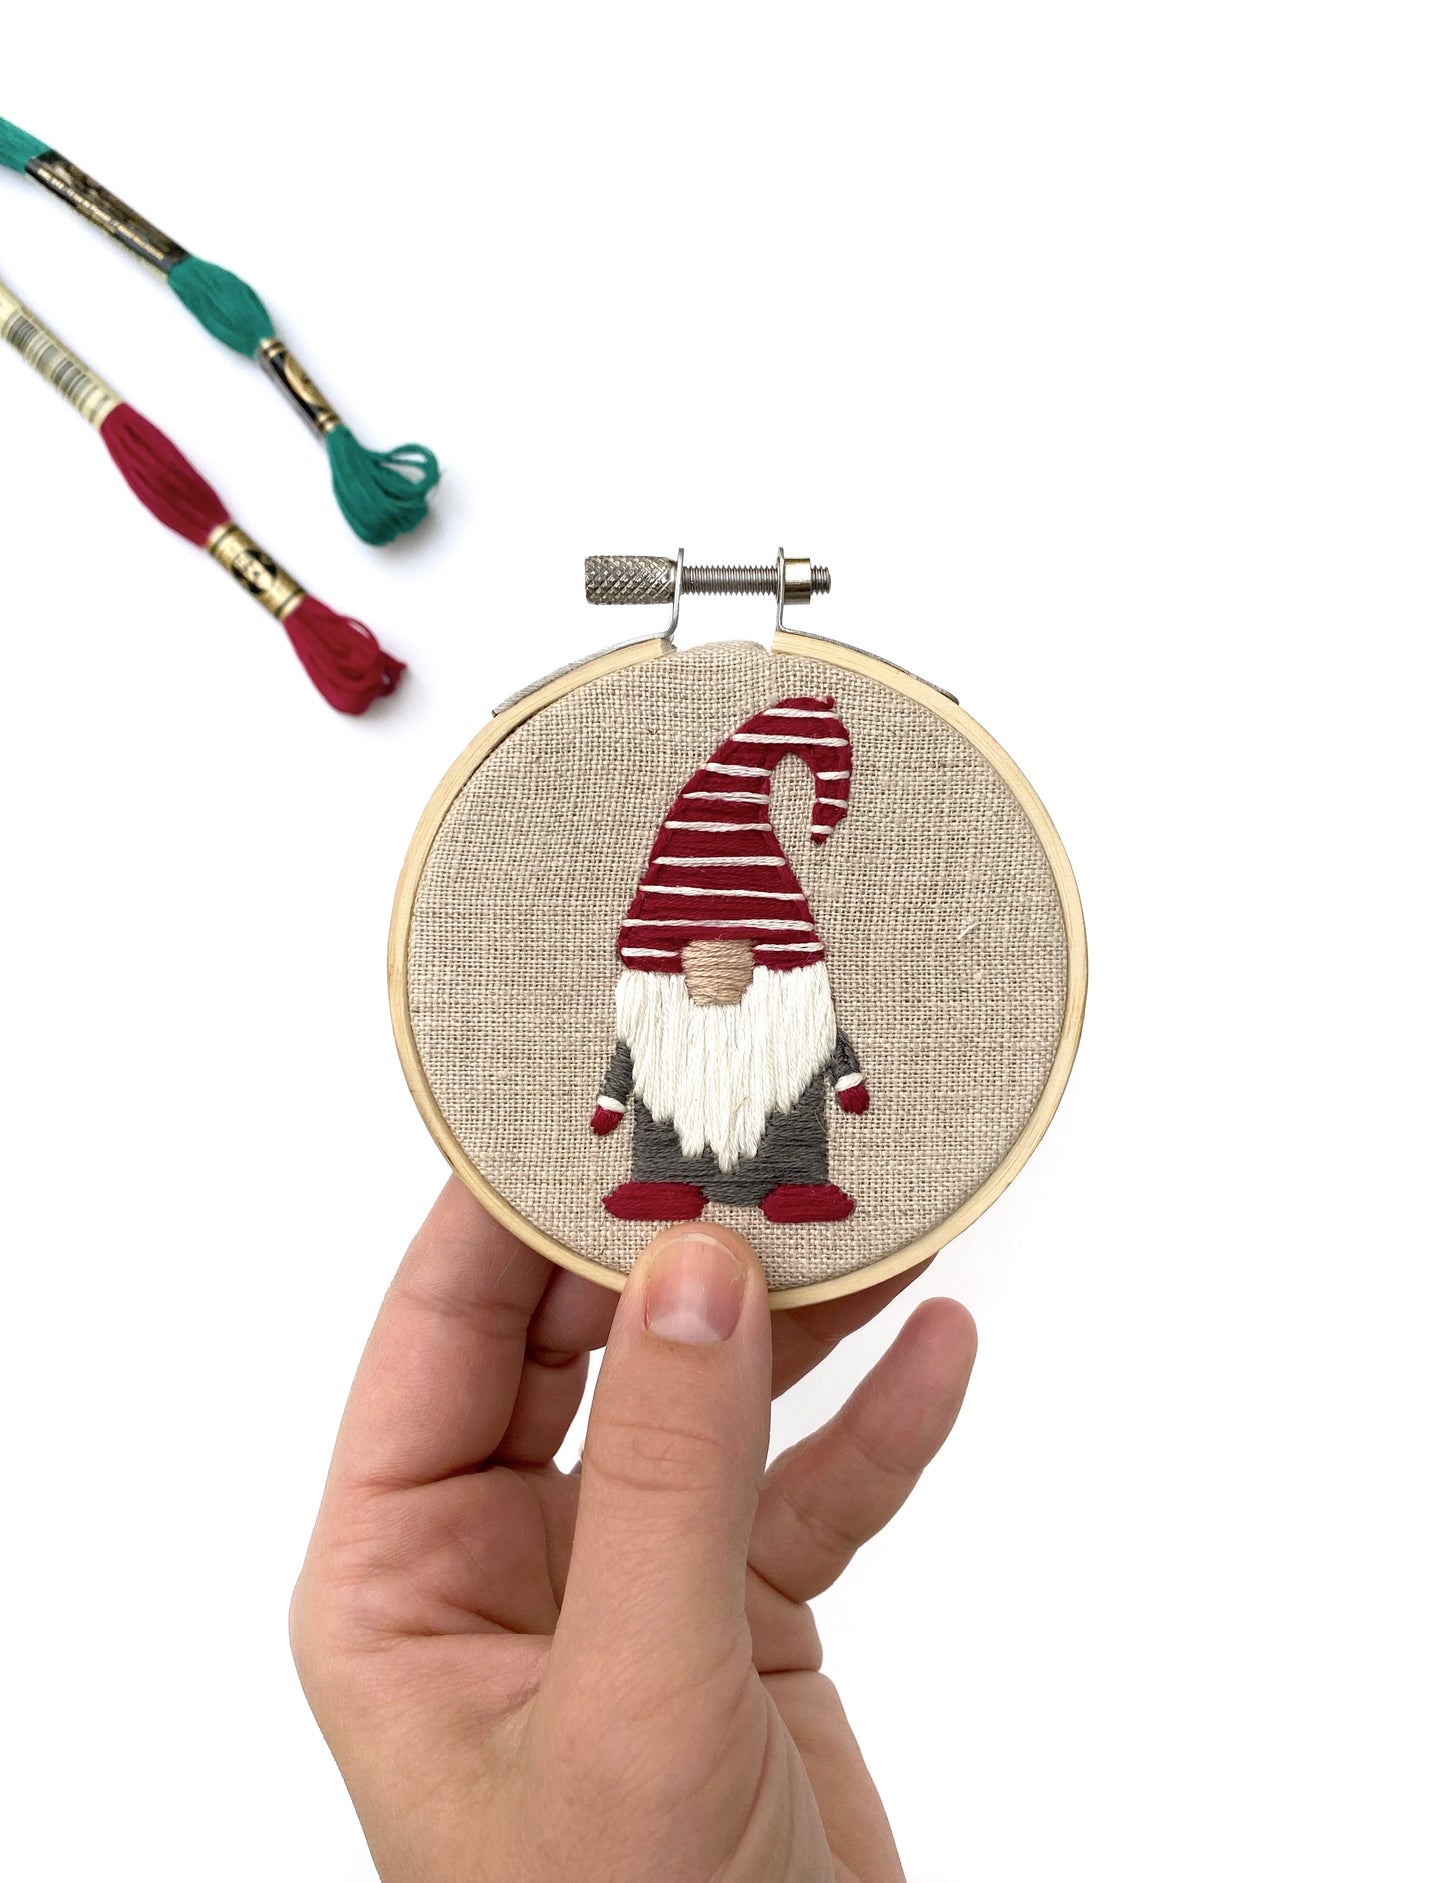 12 Christmas Ornaments PDF Embroidery Pattern